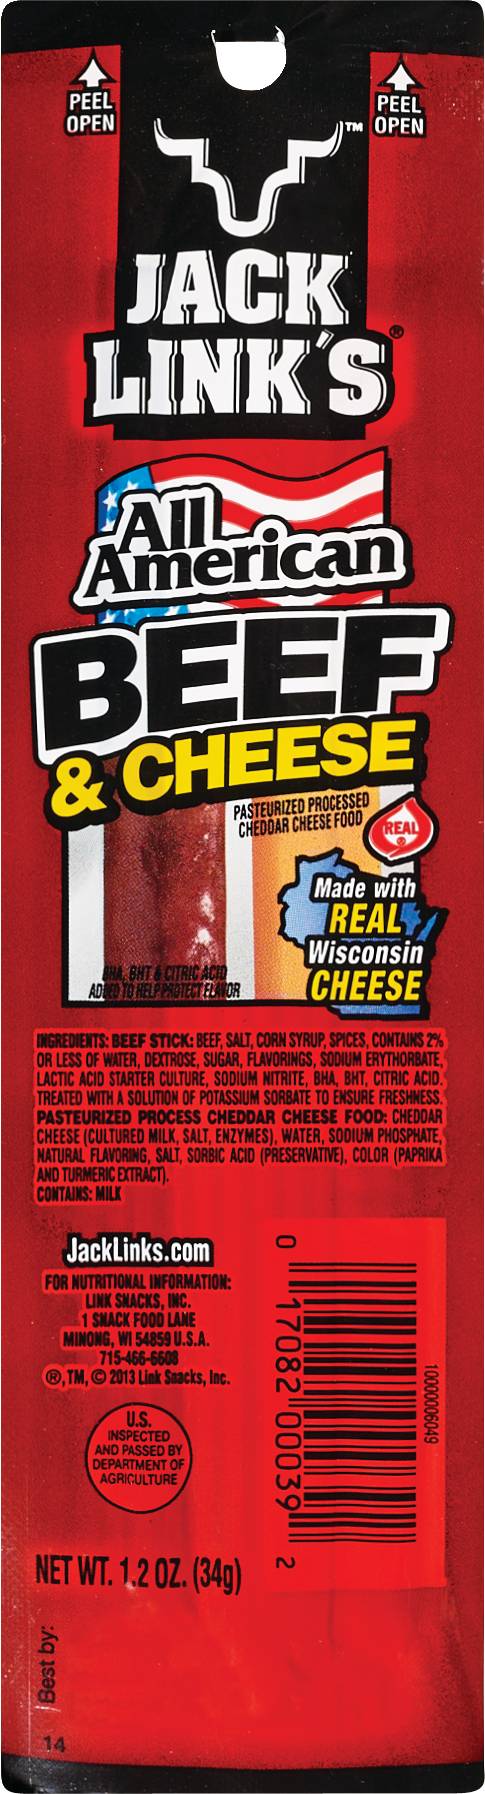 Jack Link's All American Beef & Cheese Twin Pack